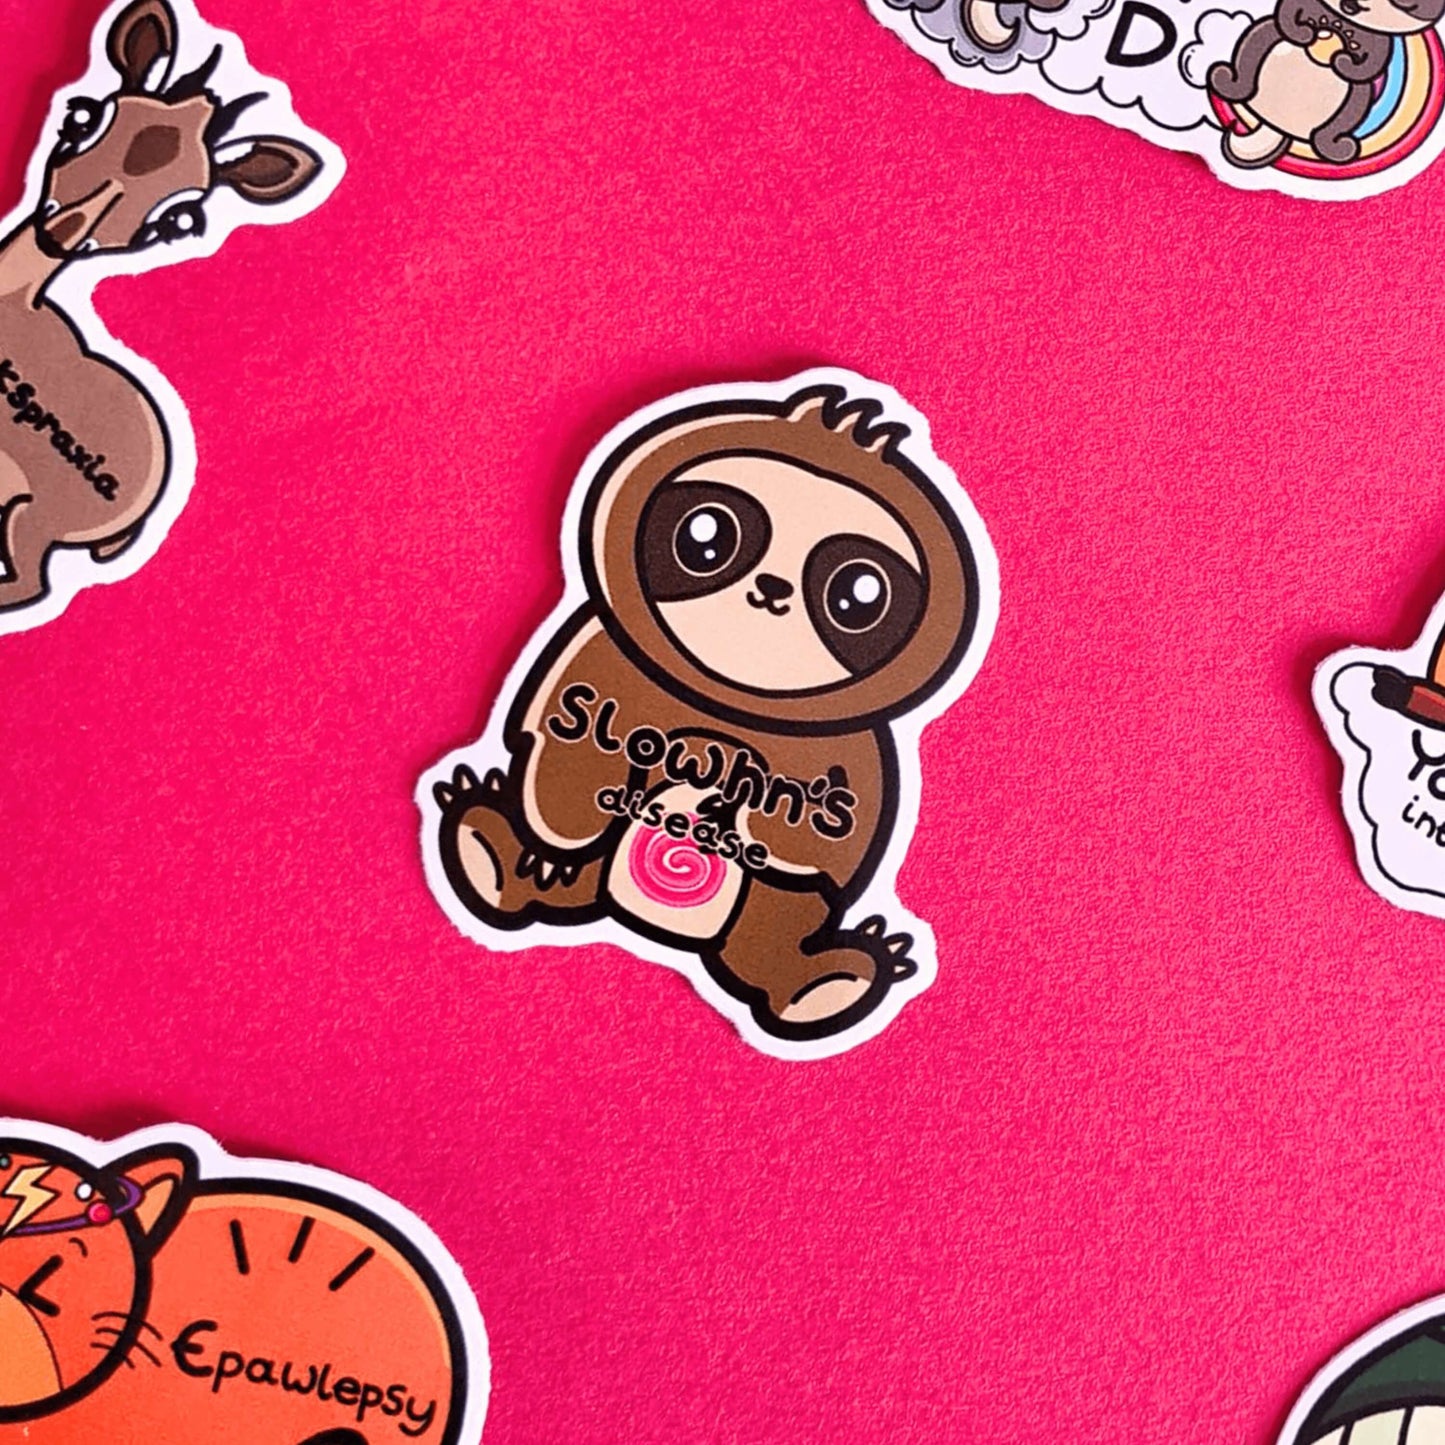 The Slowhn's Disease Sloth Sticker - Crohn's Disease being on a red background with other innabox stickers. The sloth shape sticker is smiling sat down clutching its tummy that has a red swirl and text reading 'slowhn's disease'. The design is raising awareness for crohn's disease.